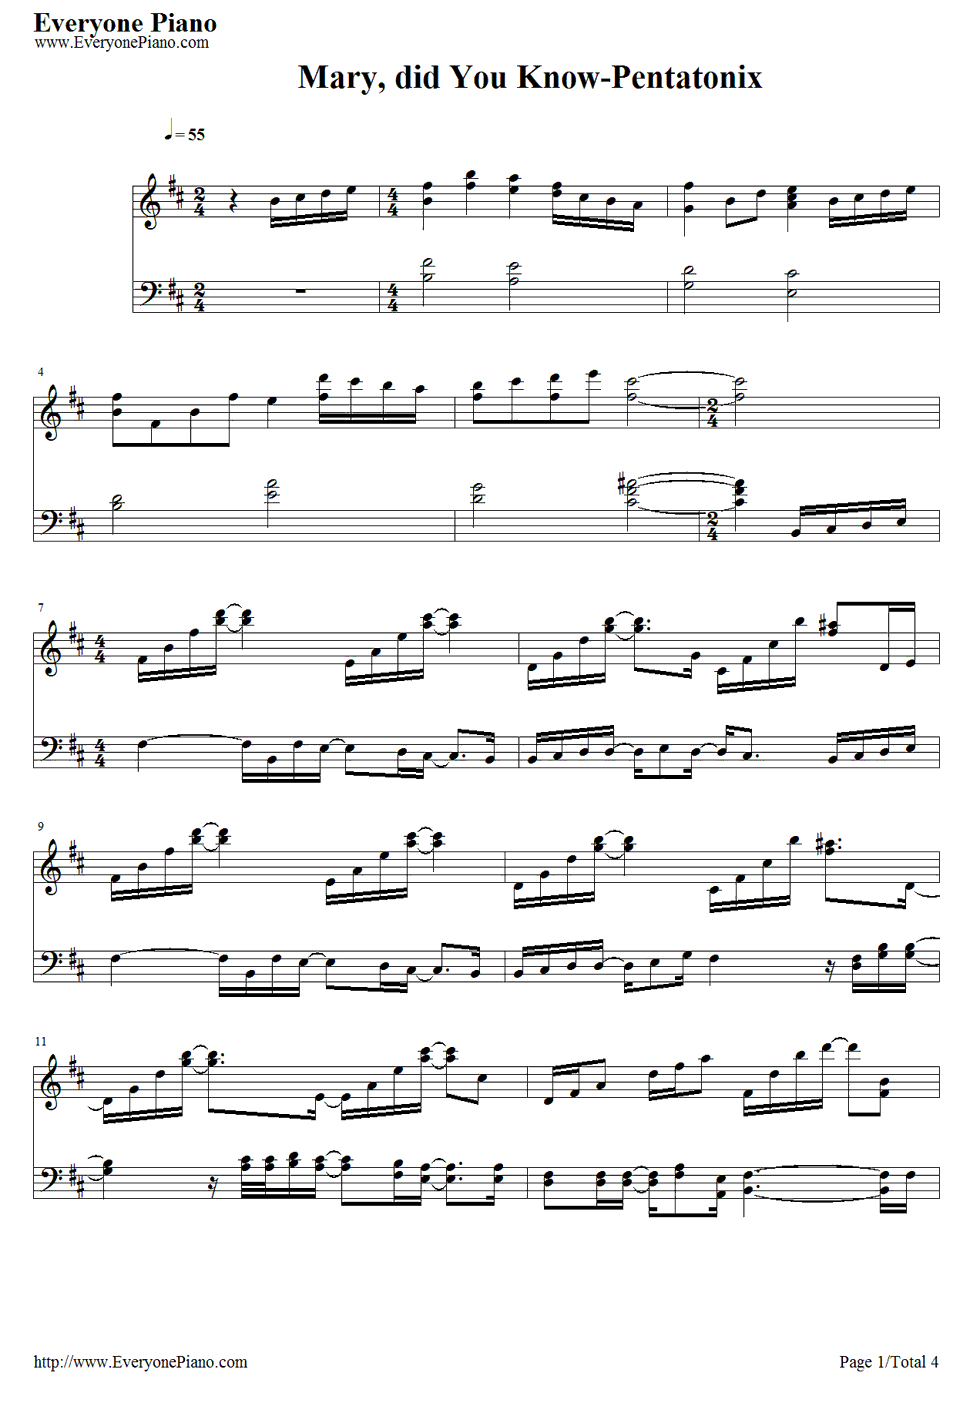 Free Mary Did You Know-Pentatonix Piano Sheet Music Preview 1 - Free - Free Printable Gospel Sheet Music For Piano